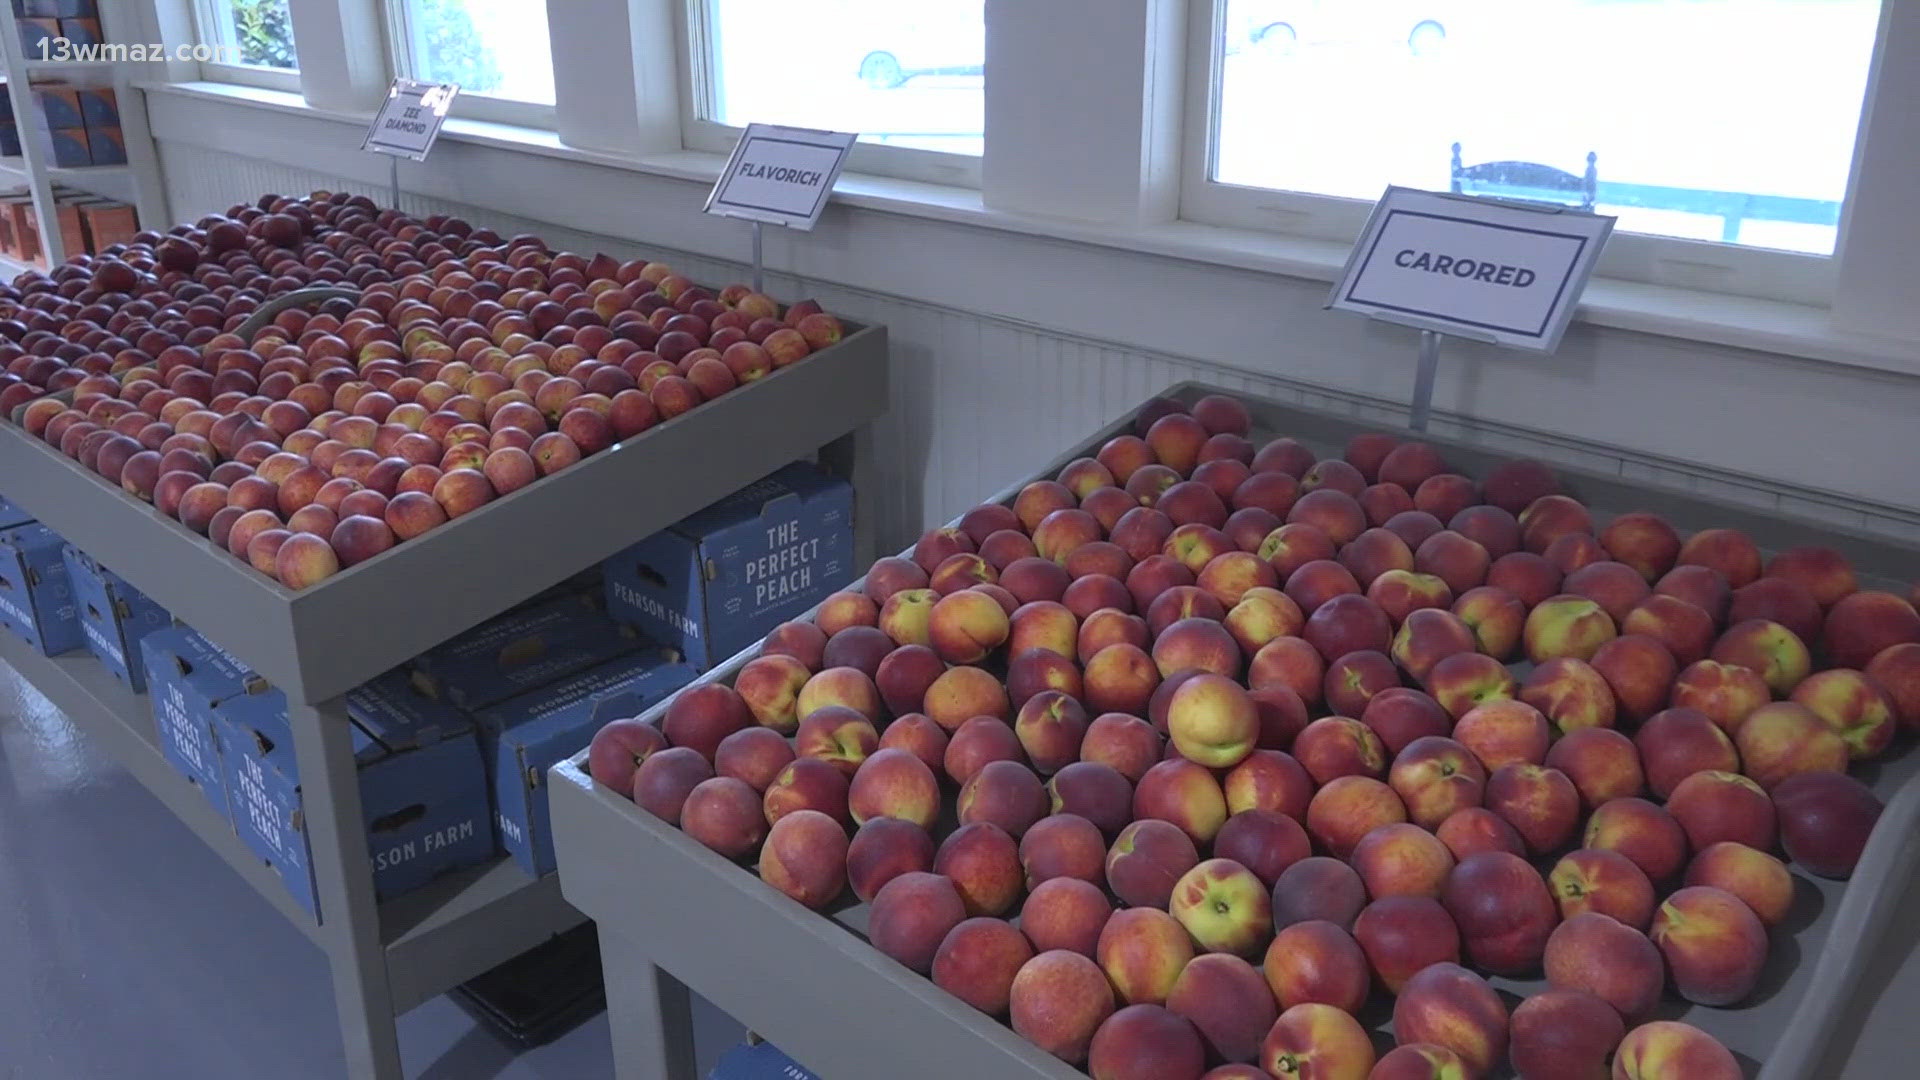 Last year, many peach farmers in Georgia lost more than 90% of their crop. Now, they are seeing the opposite.